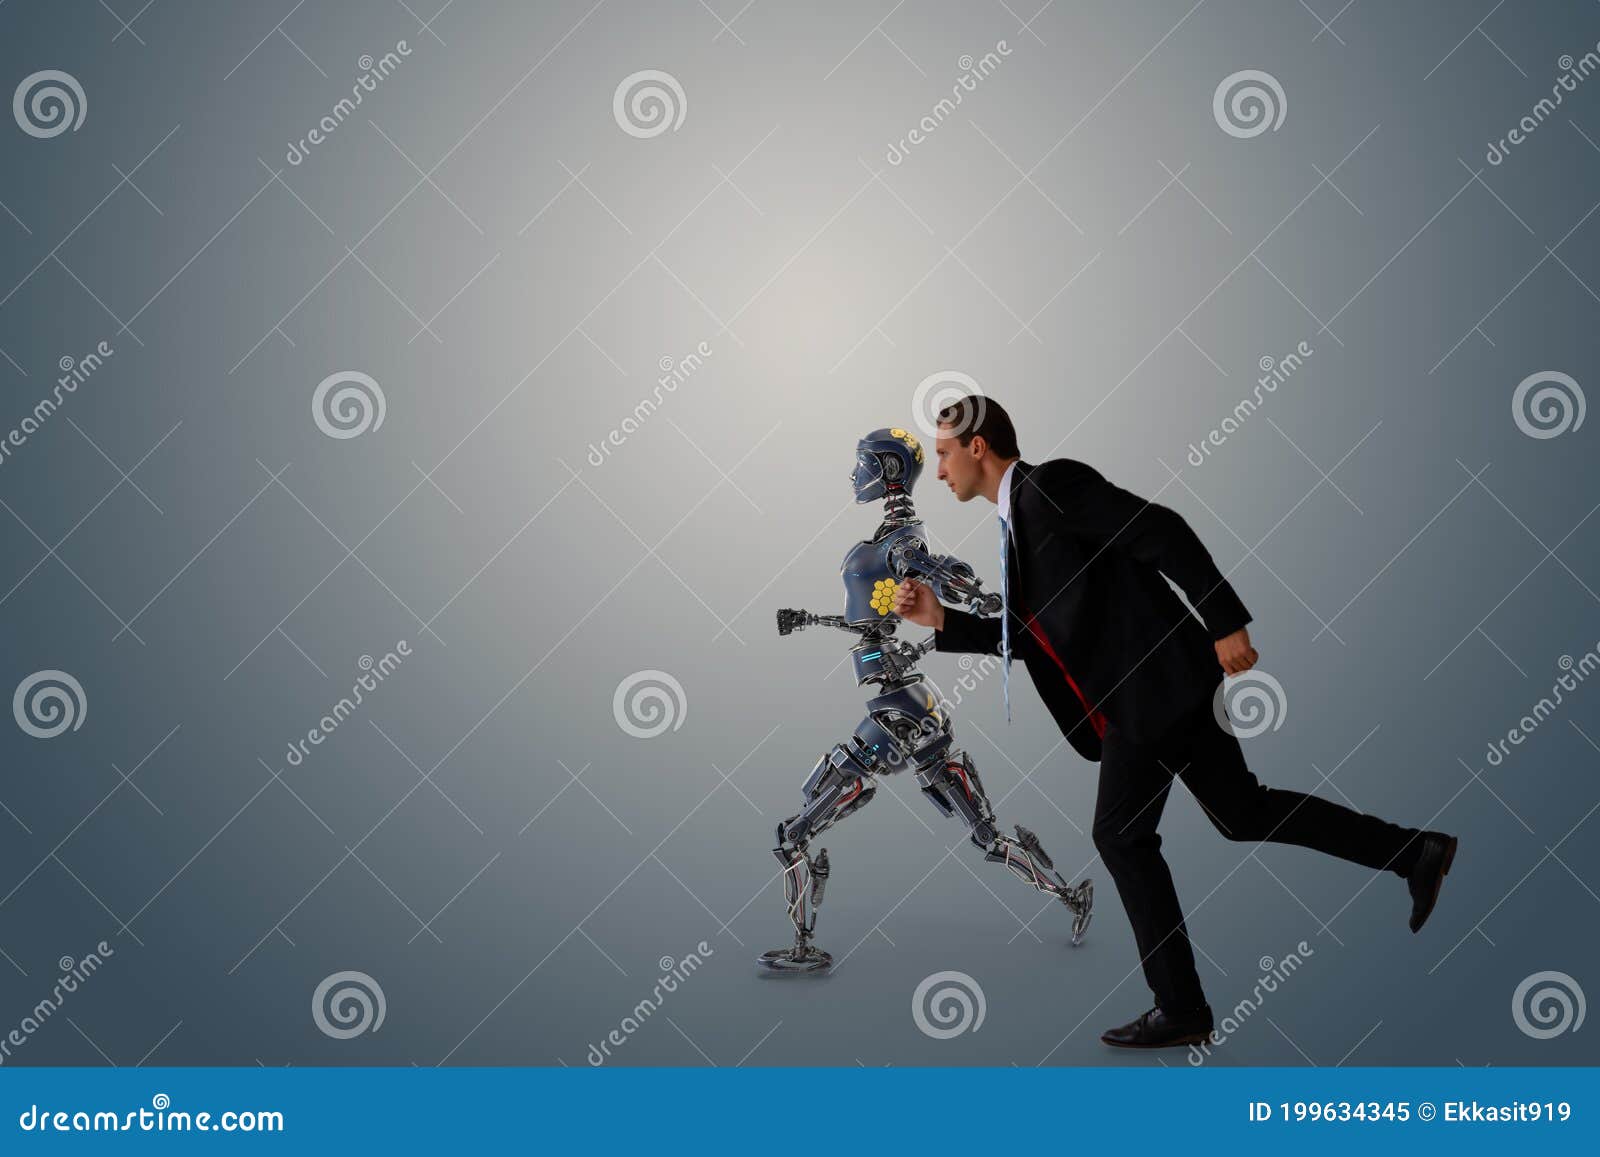 business man try to make a compete, race, battle, fight with robot or artificial intelligence for fight for work, chance, job, opp